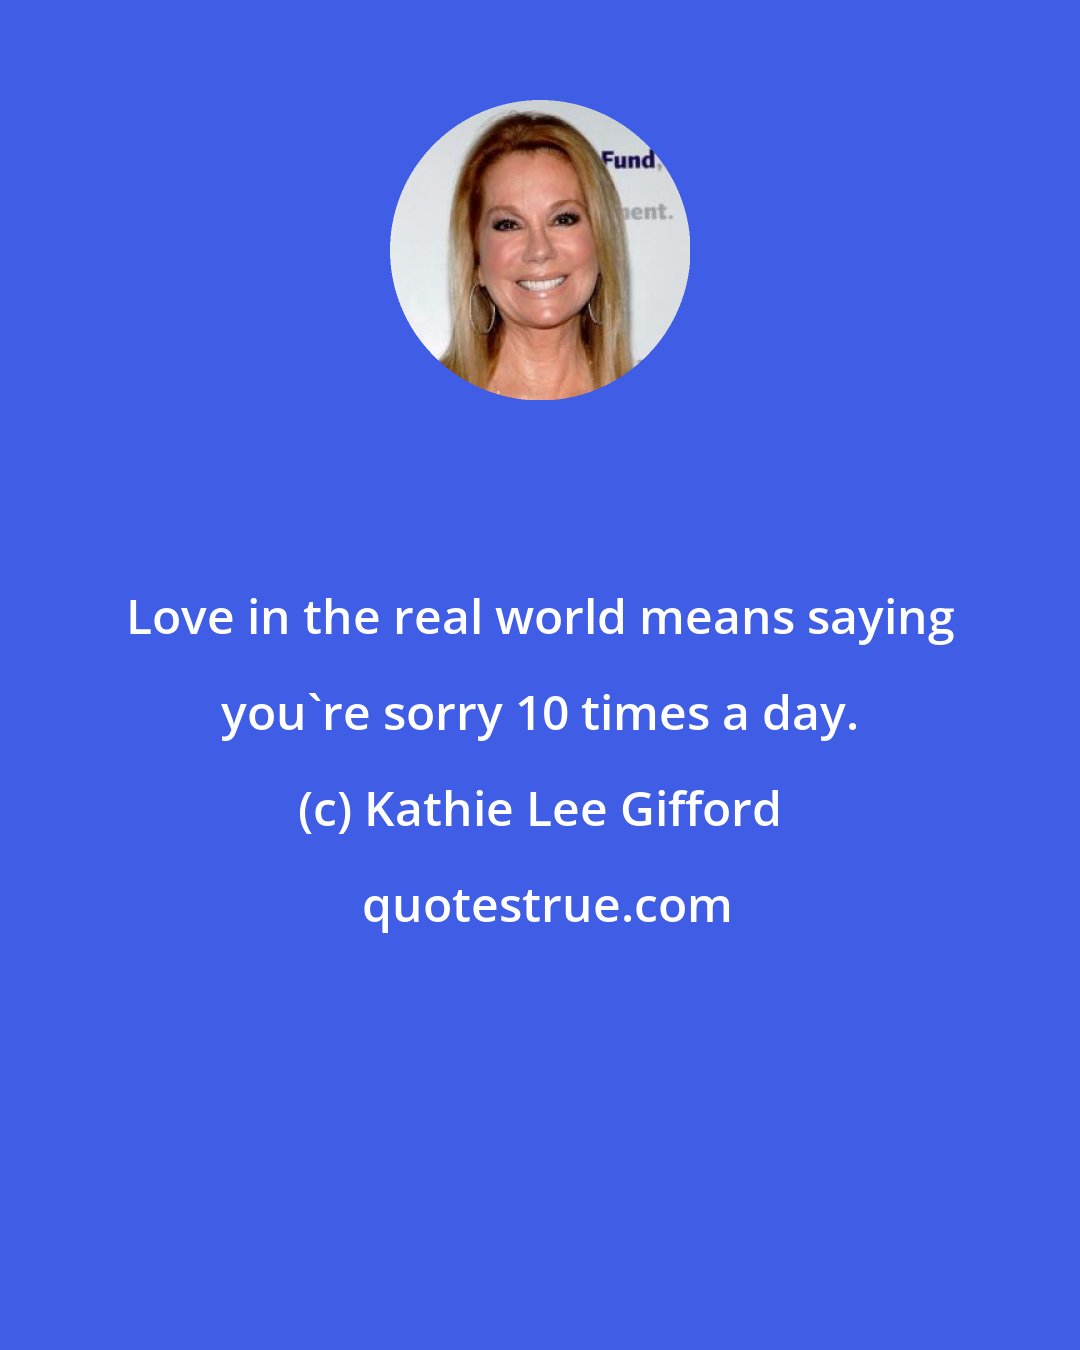 Kathie Lee Gifford: Love in the real world means saying you're sorry 10 times a day.